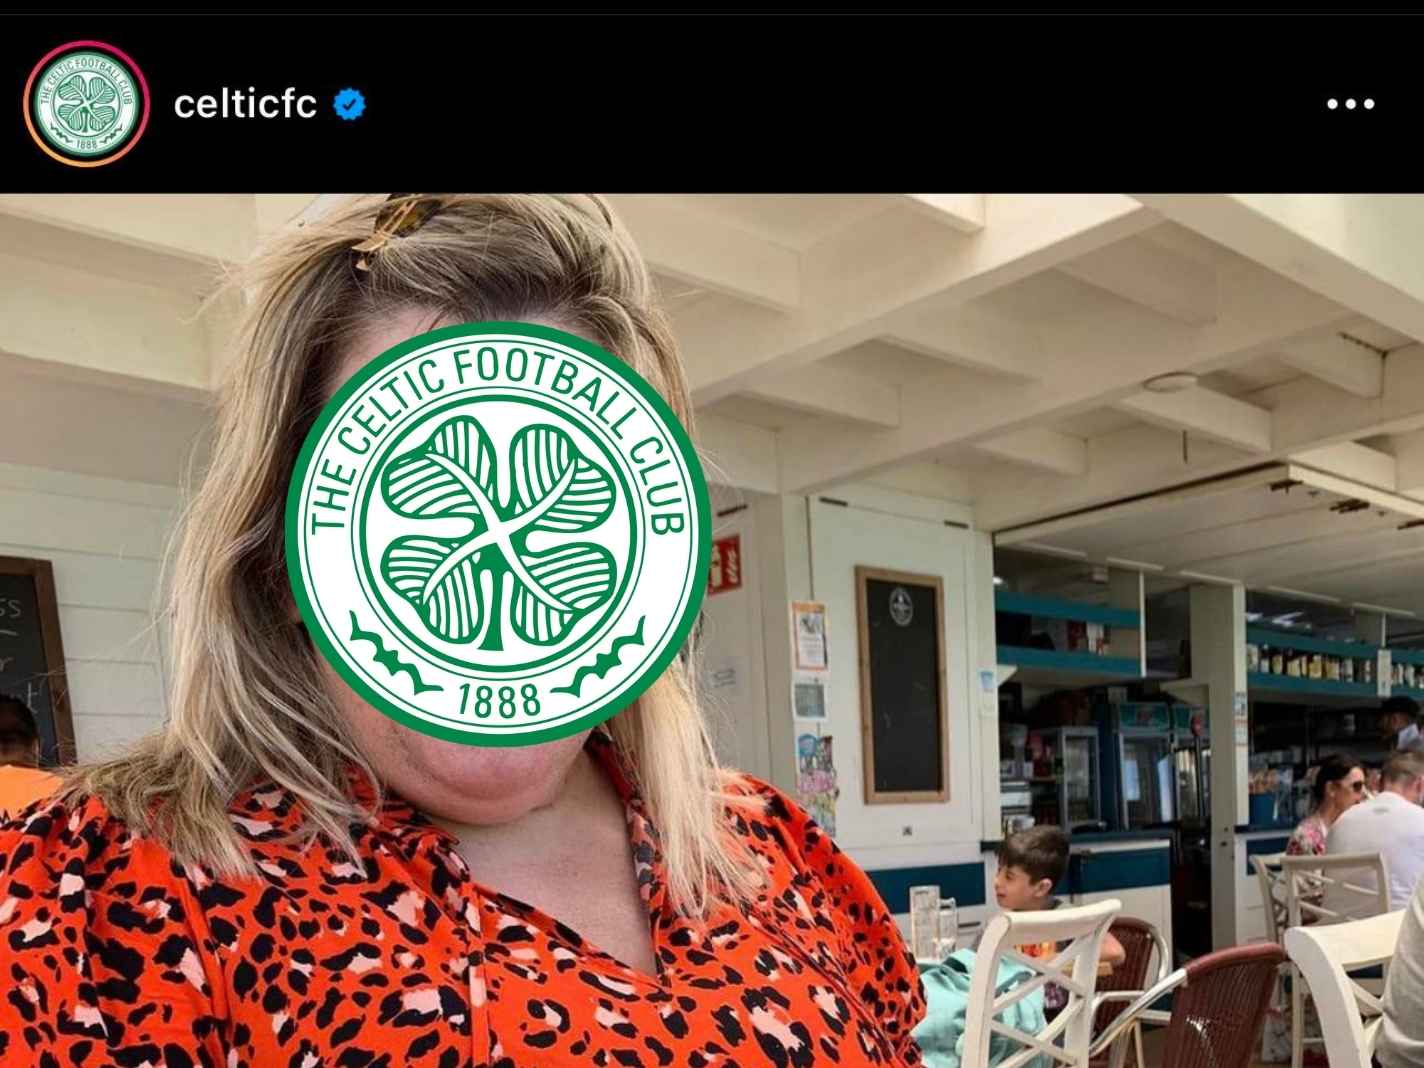 Oops: Celtic Admin Posts Personal Update On Official Instagram Account